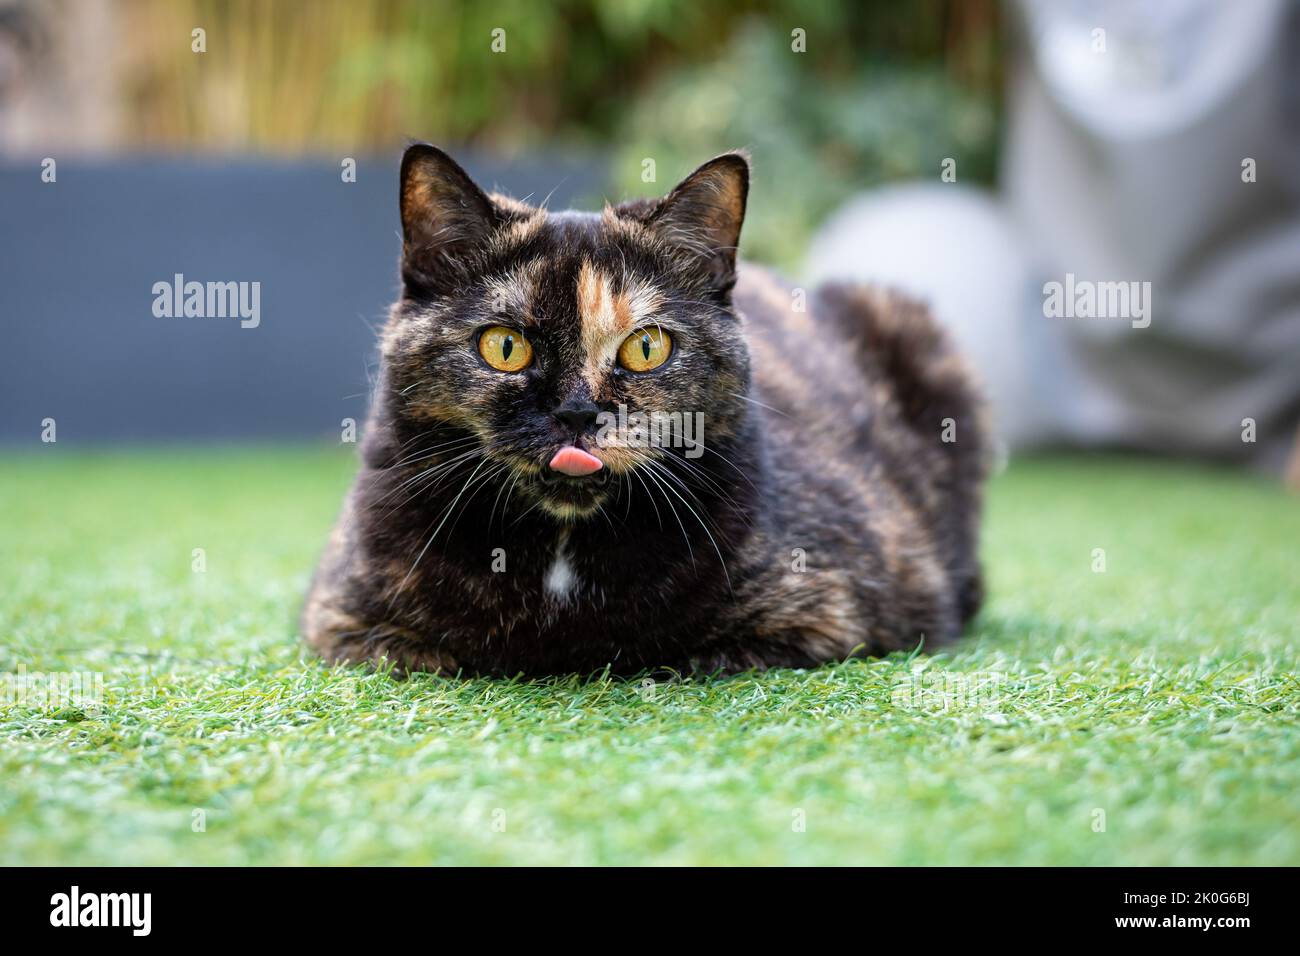 Funny cat sitting in the grass with its tongue out. British shorthair sticking out its tongue. Stock Photo